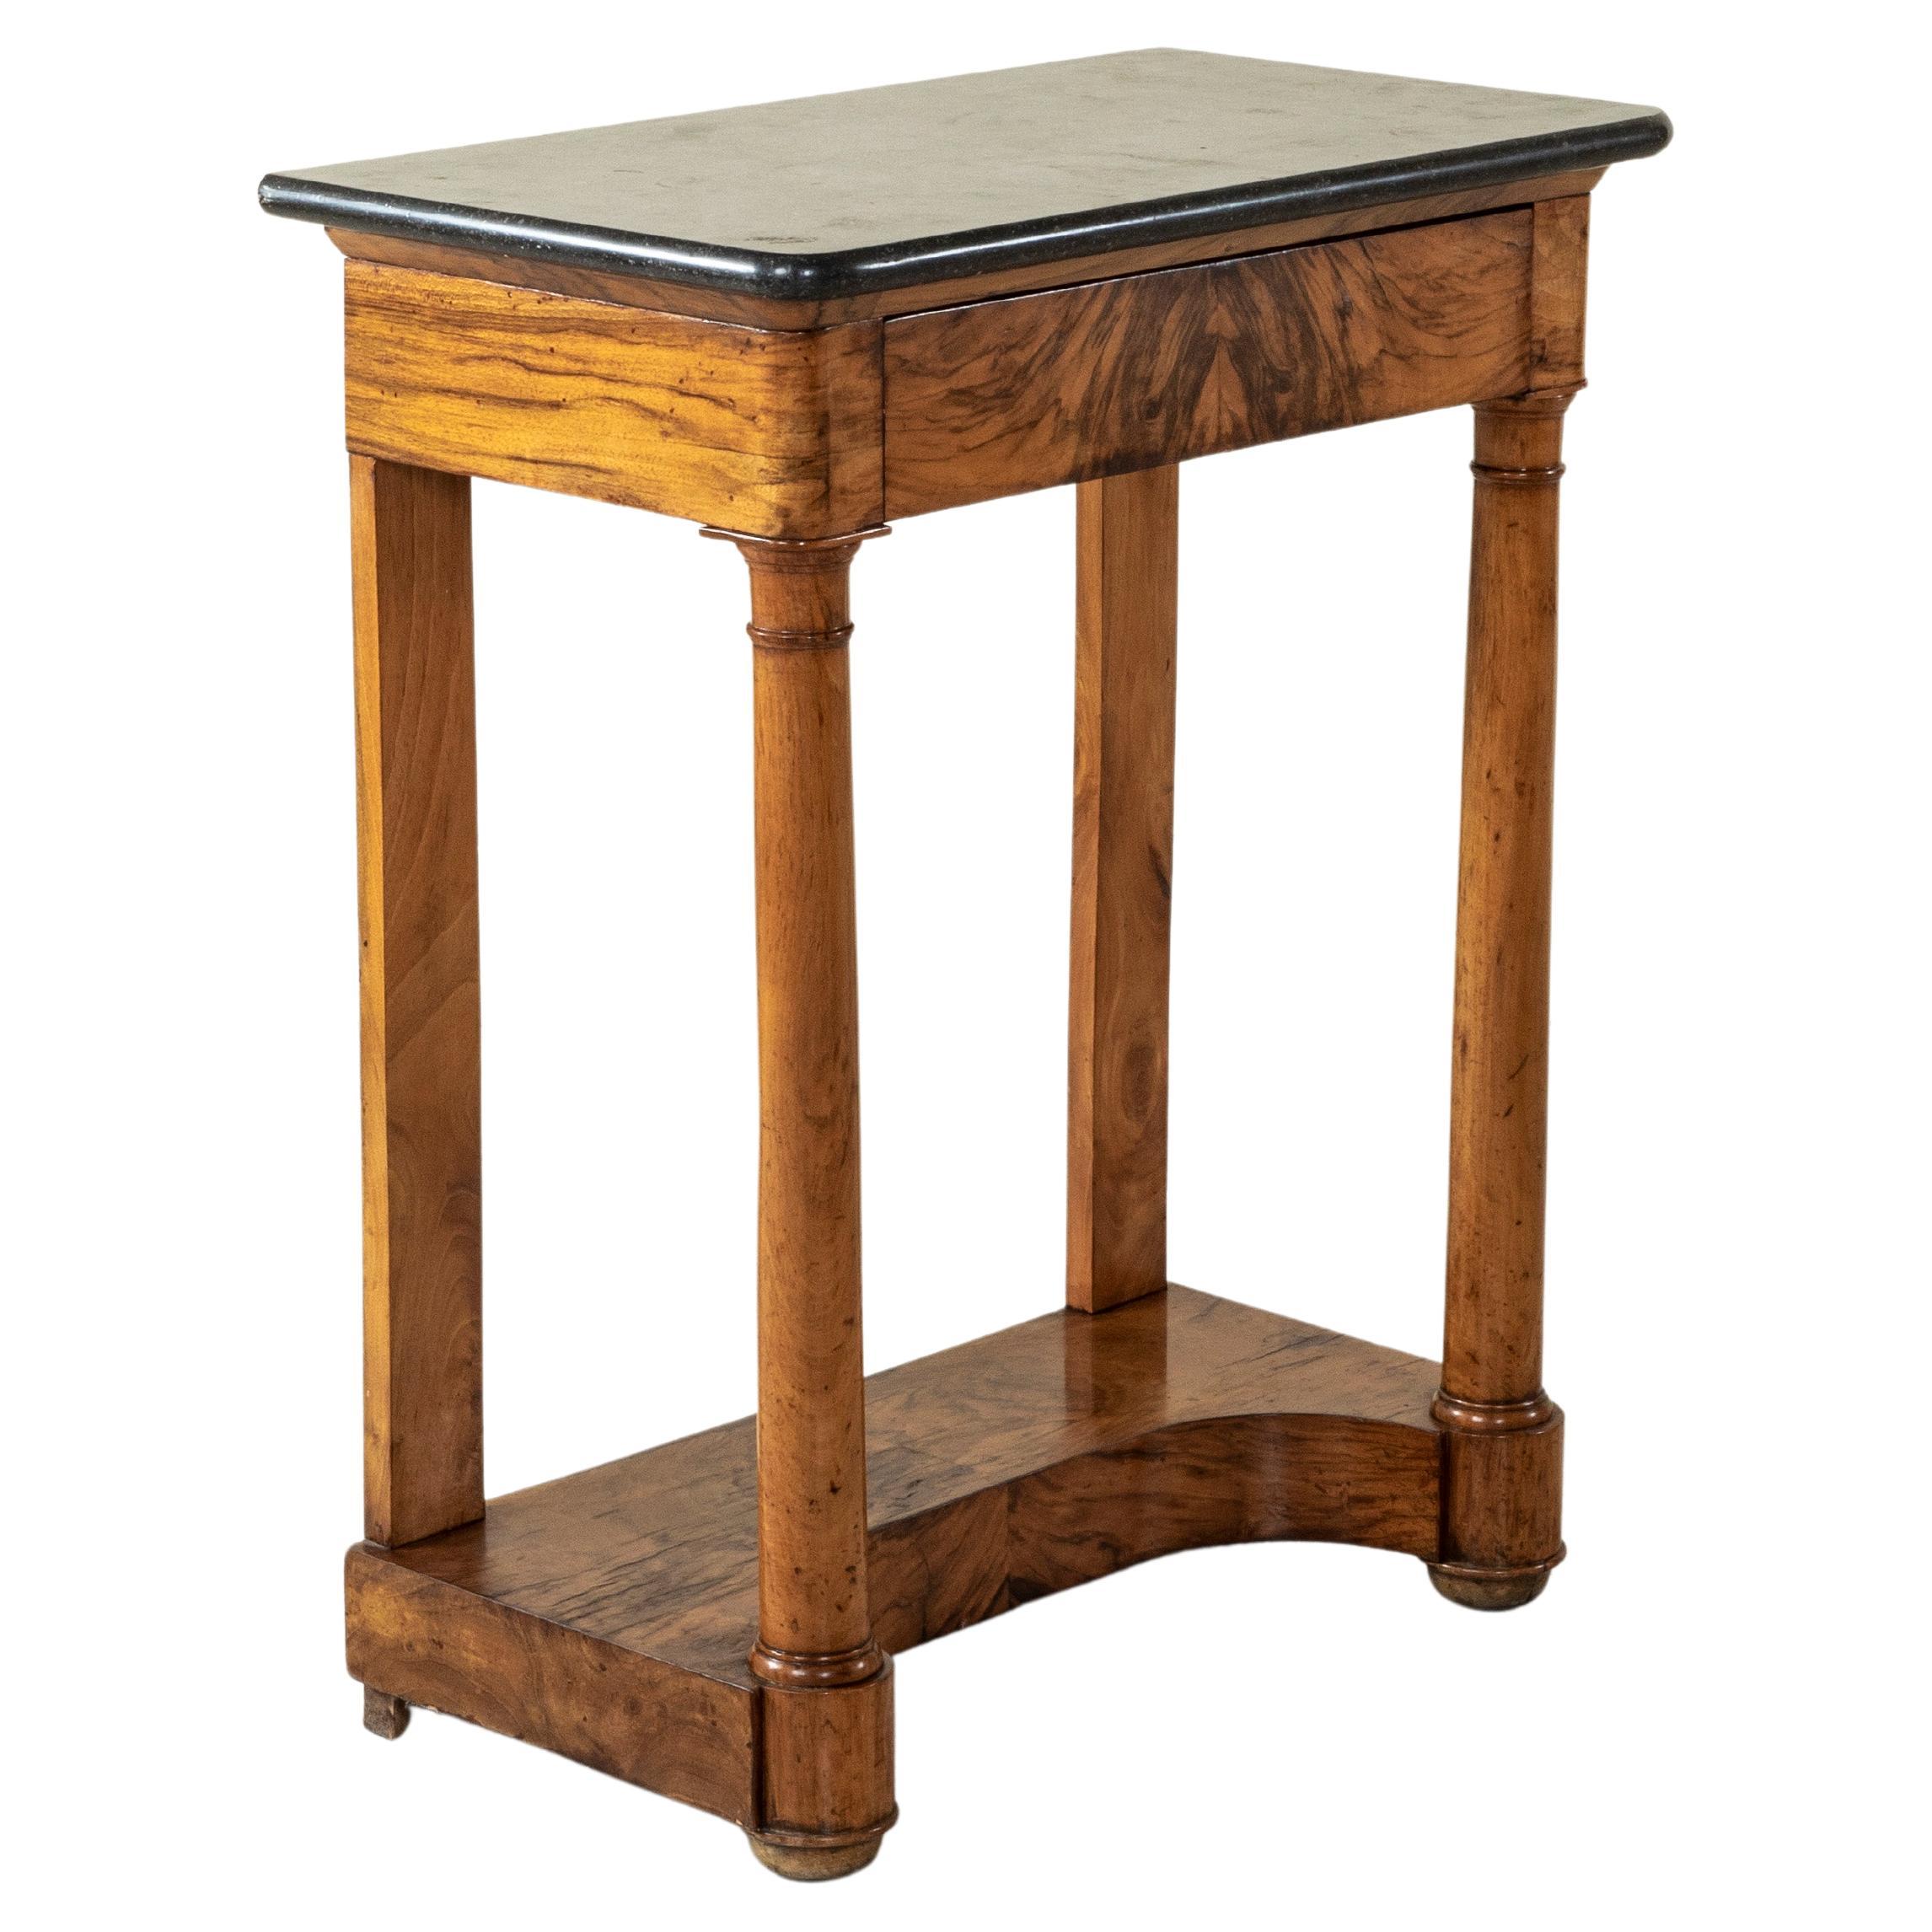 Small Scale 19th Century French Empire Period Walnut Console Table, Marble Top